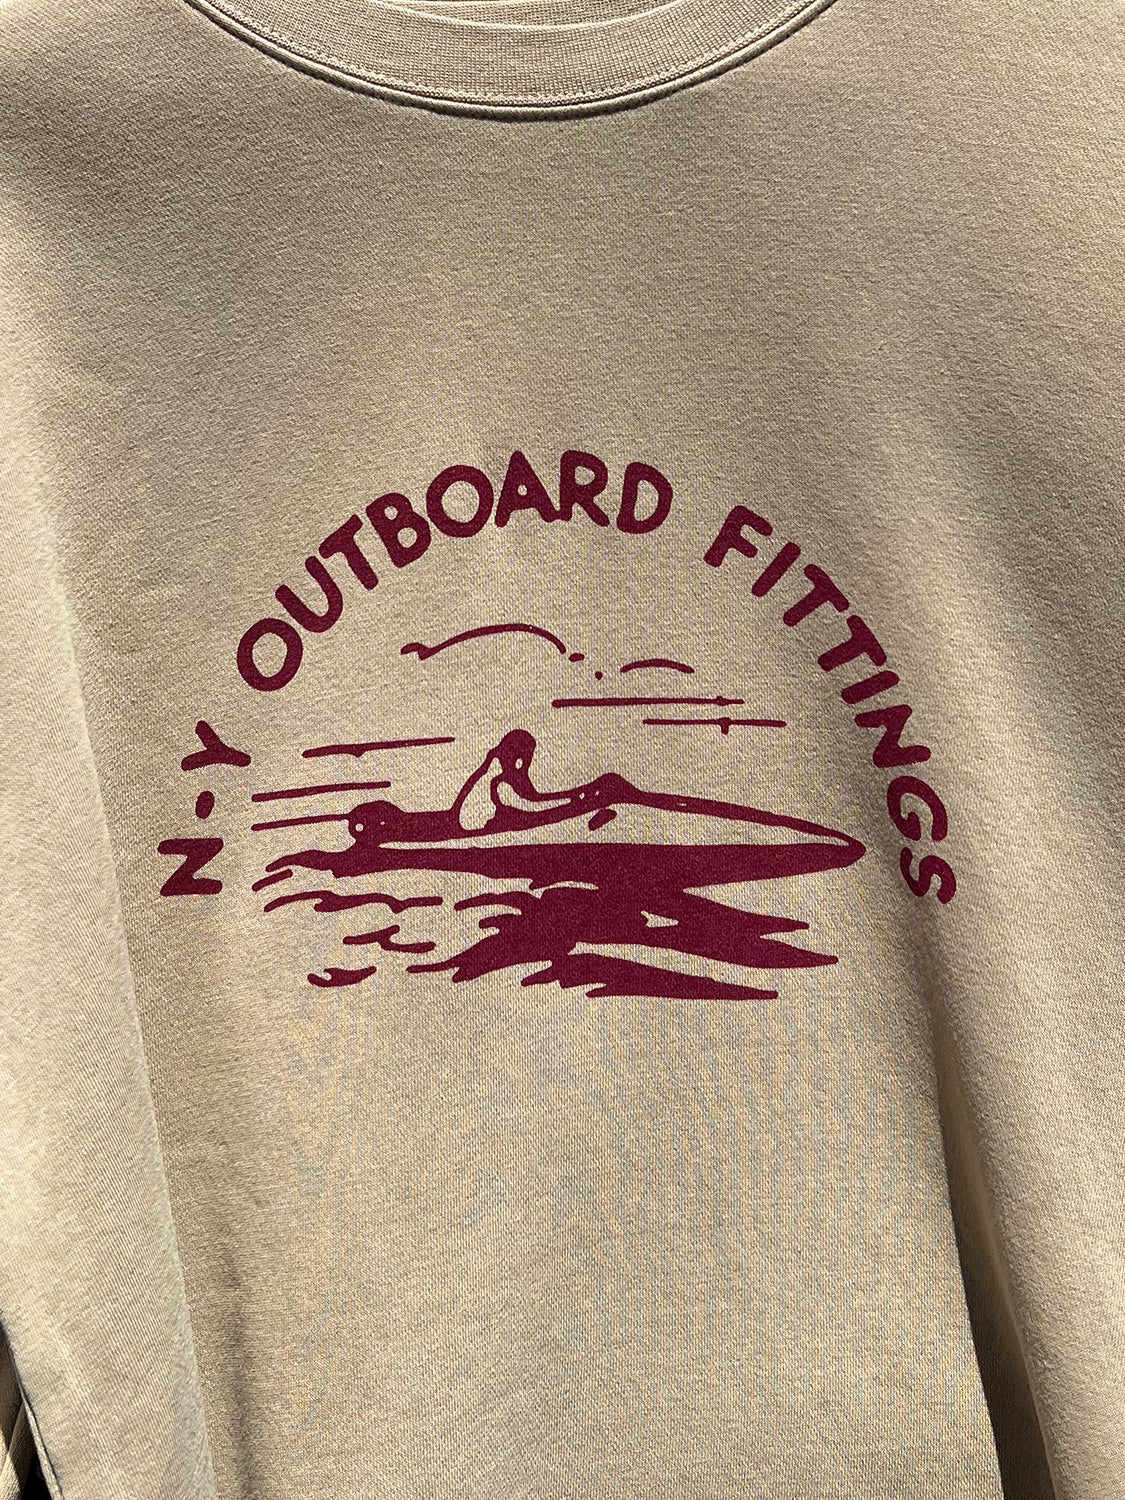 Outboard Fittings Crewneck - Sand